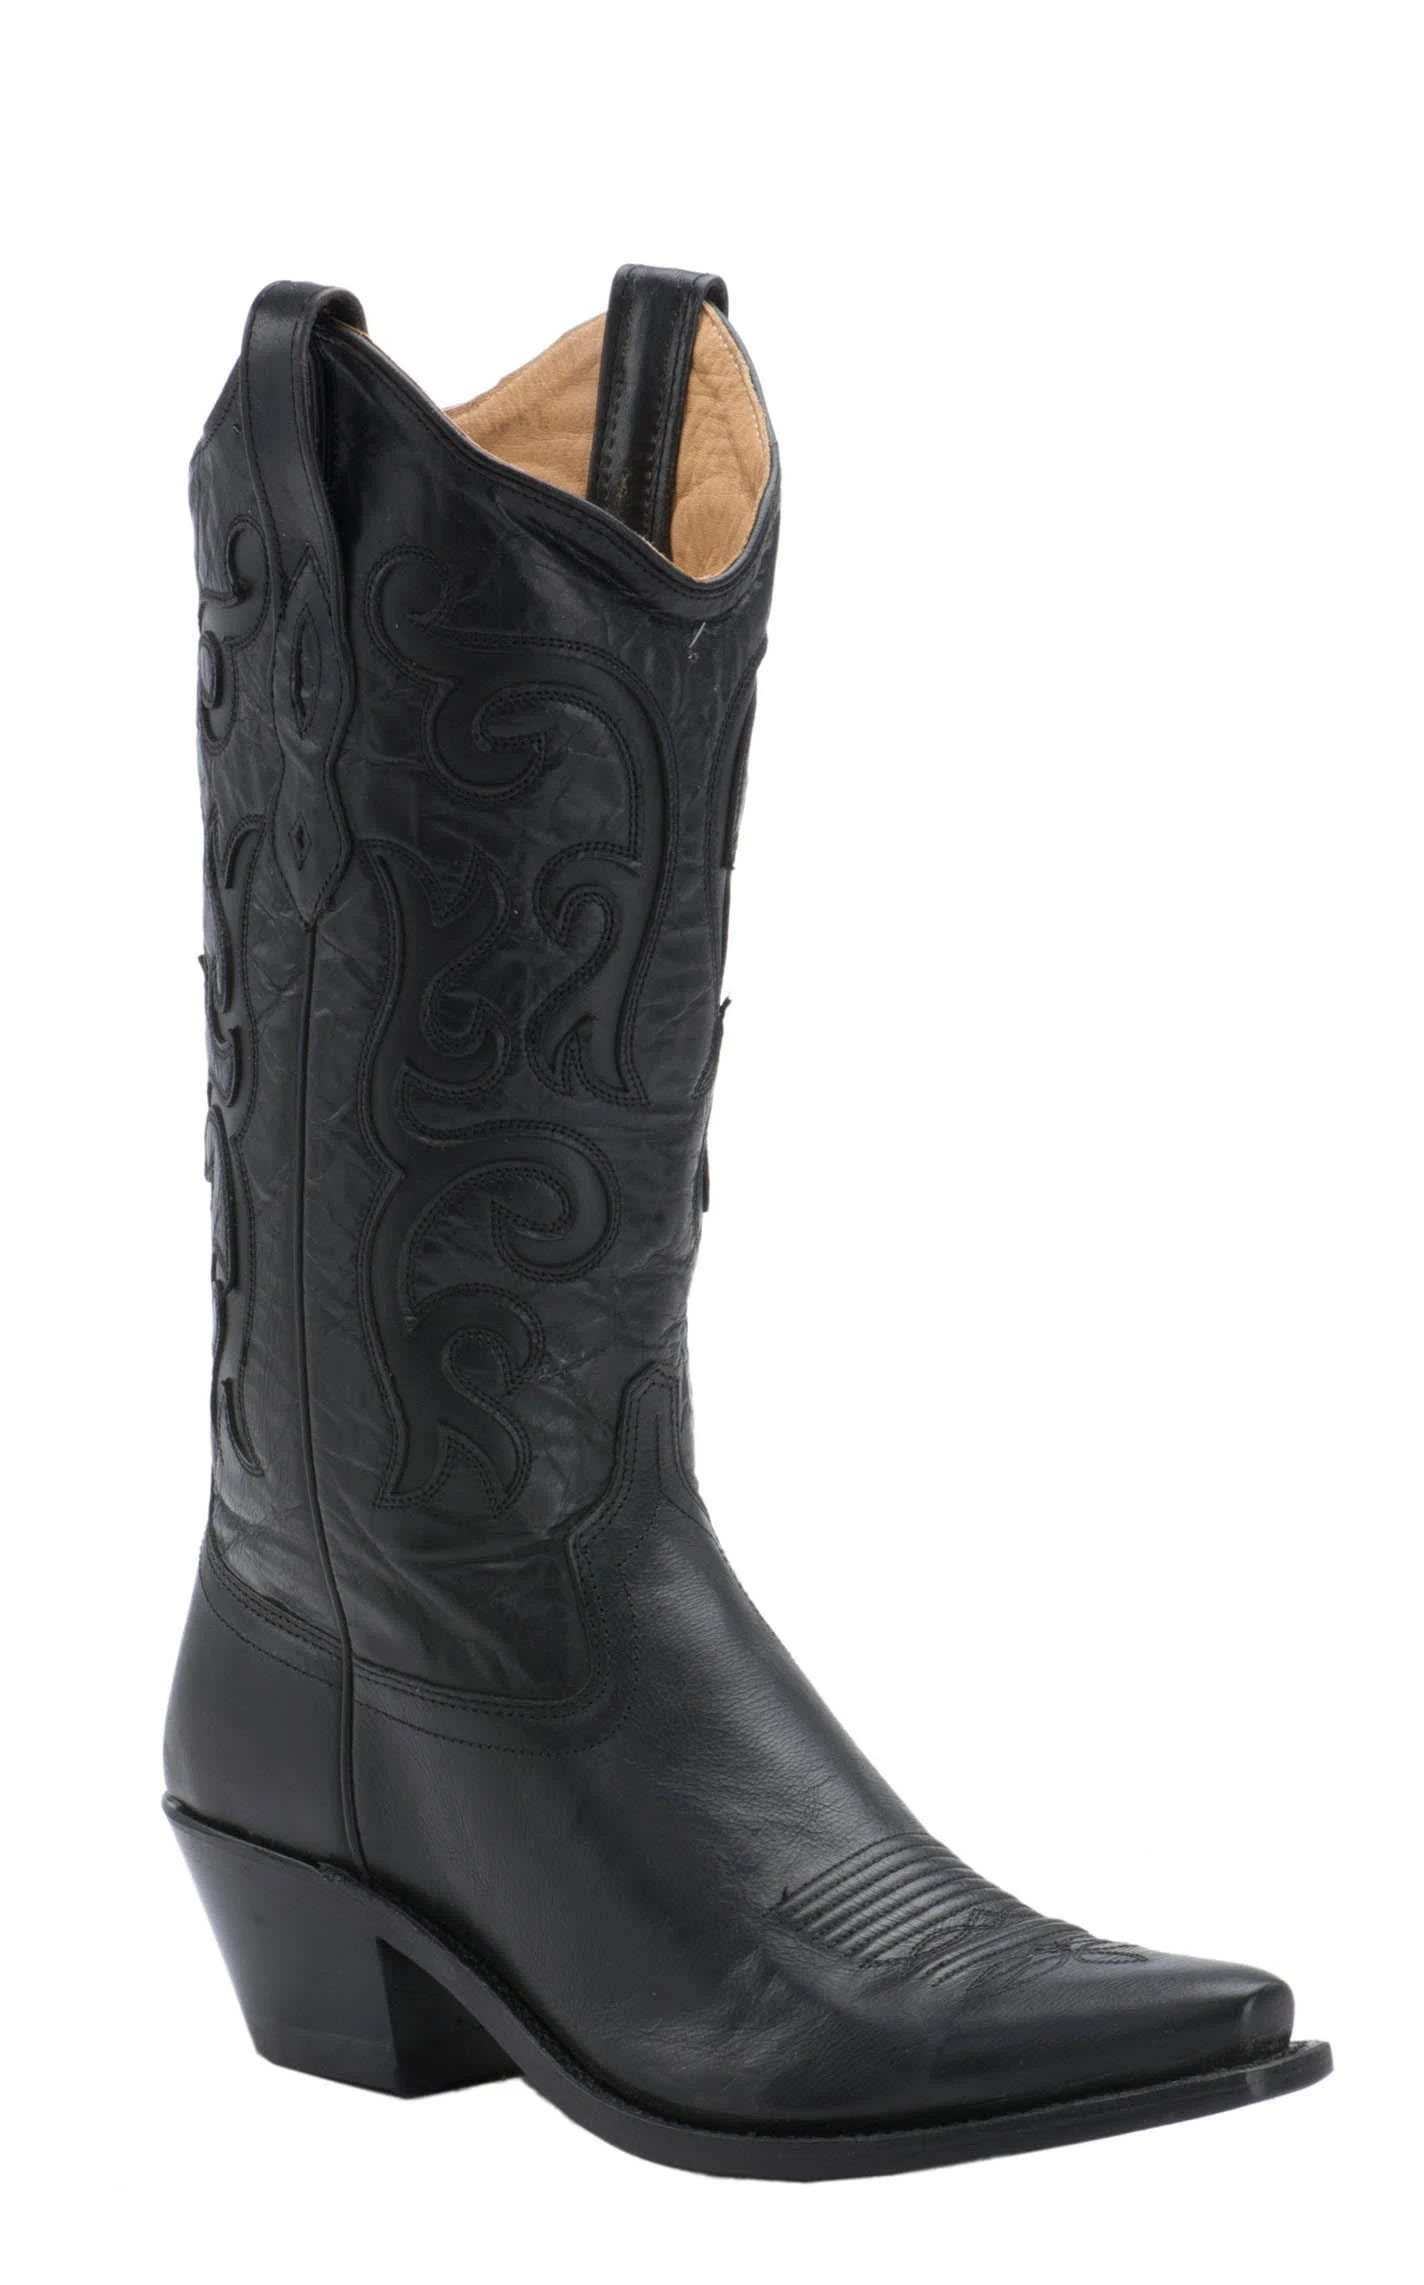 Quality Black Cowboy Boots with Handcrafted Details | Image